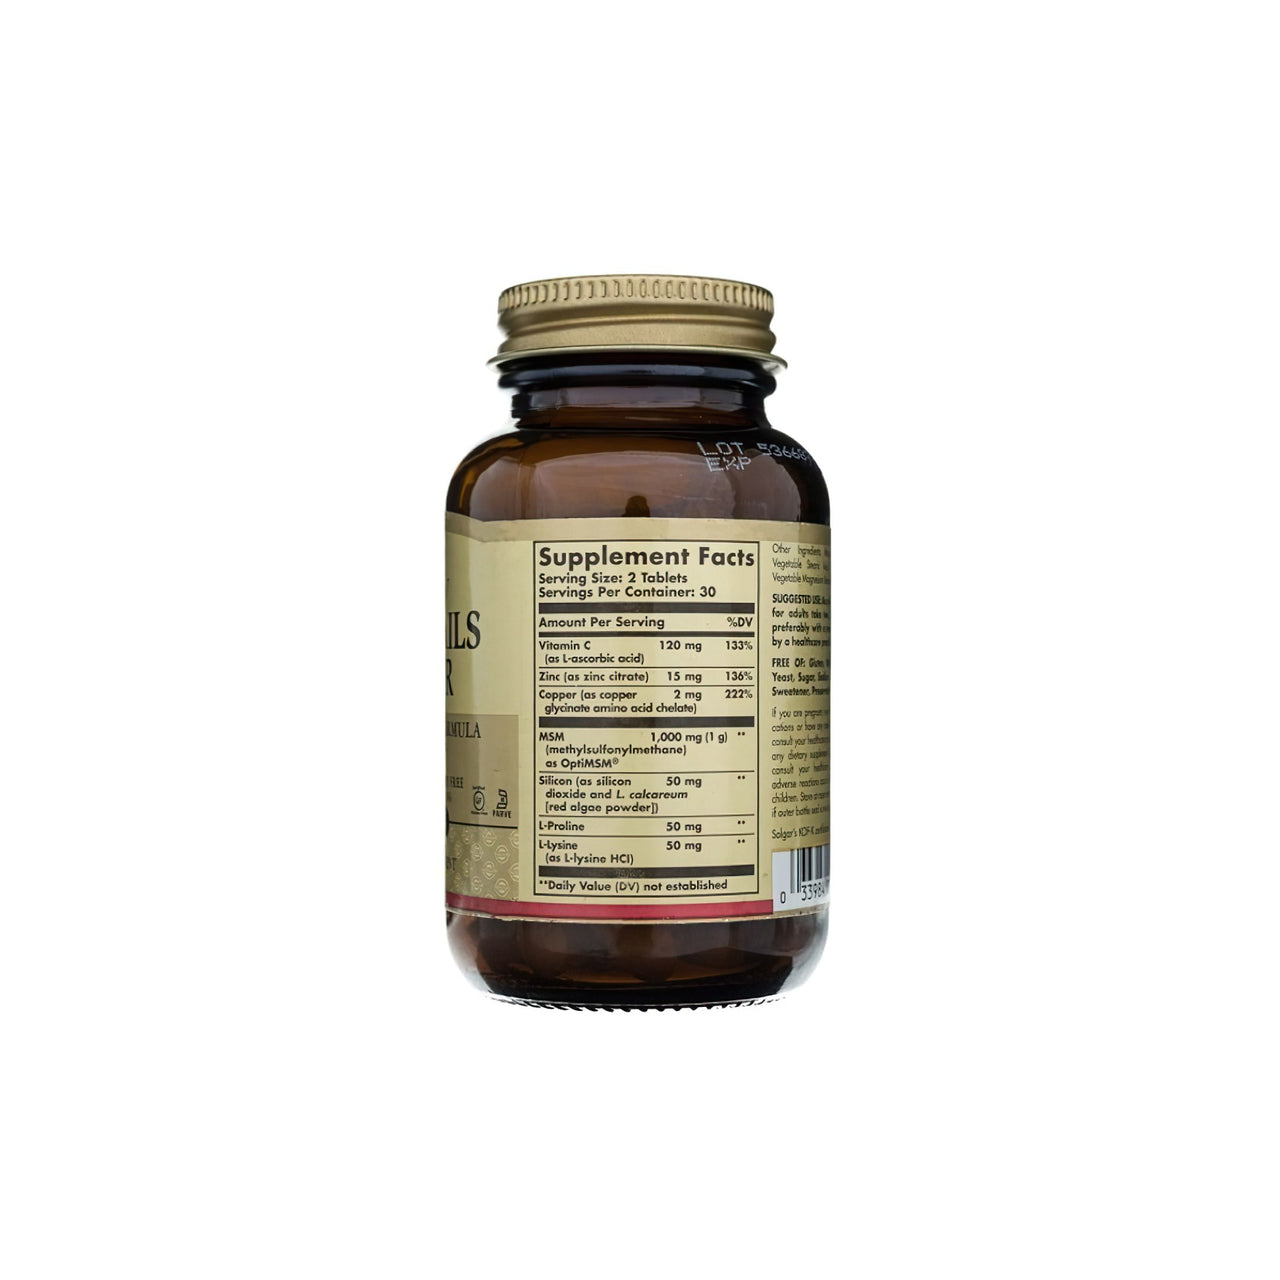 A bottle of Solgar Hair, Skin & Nails 60 tablets on a white background.